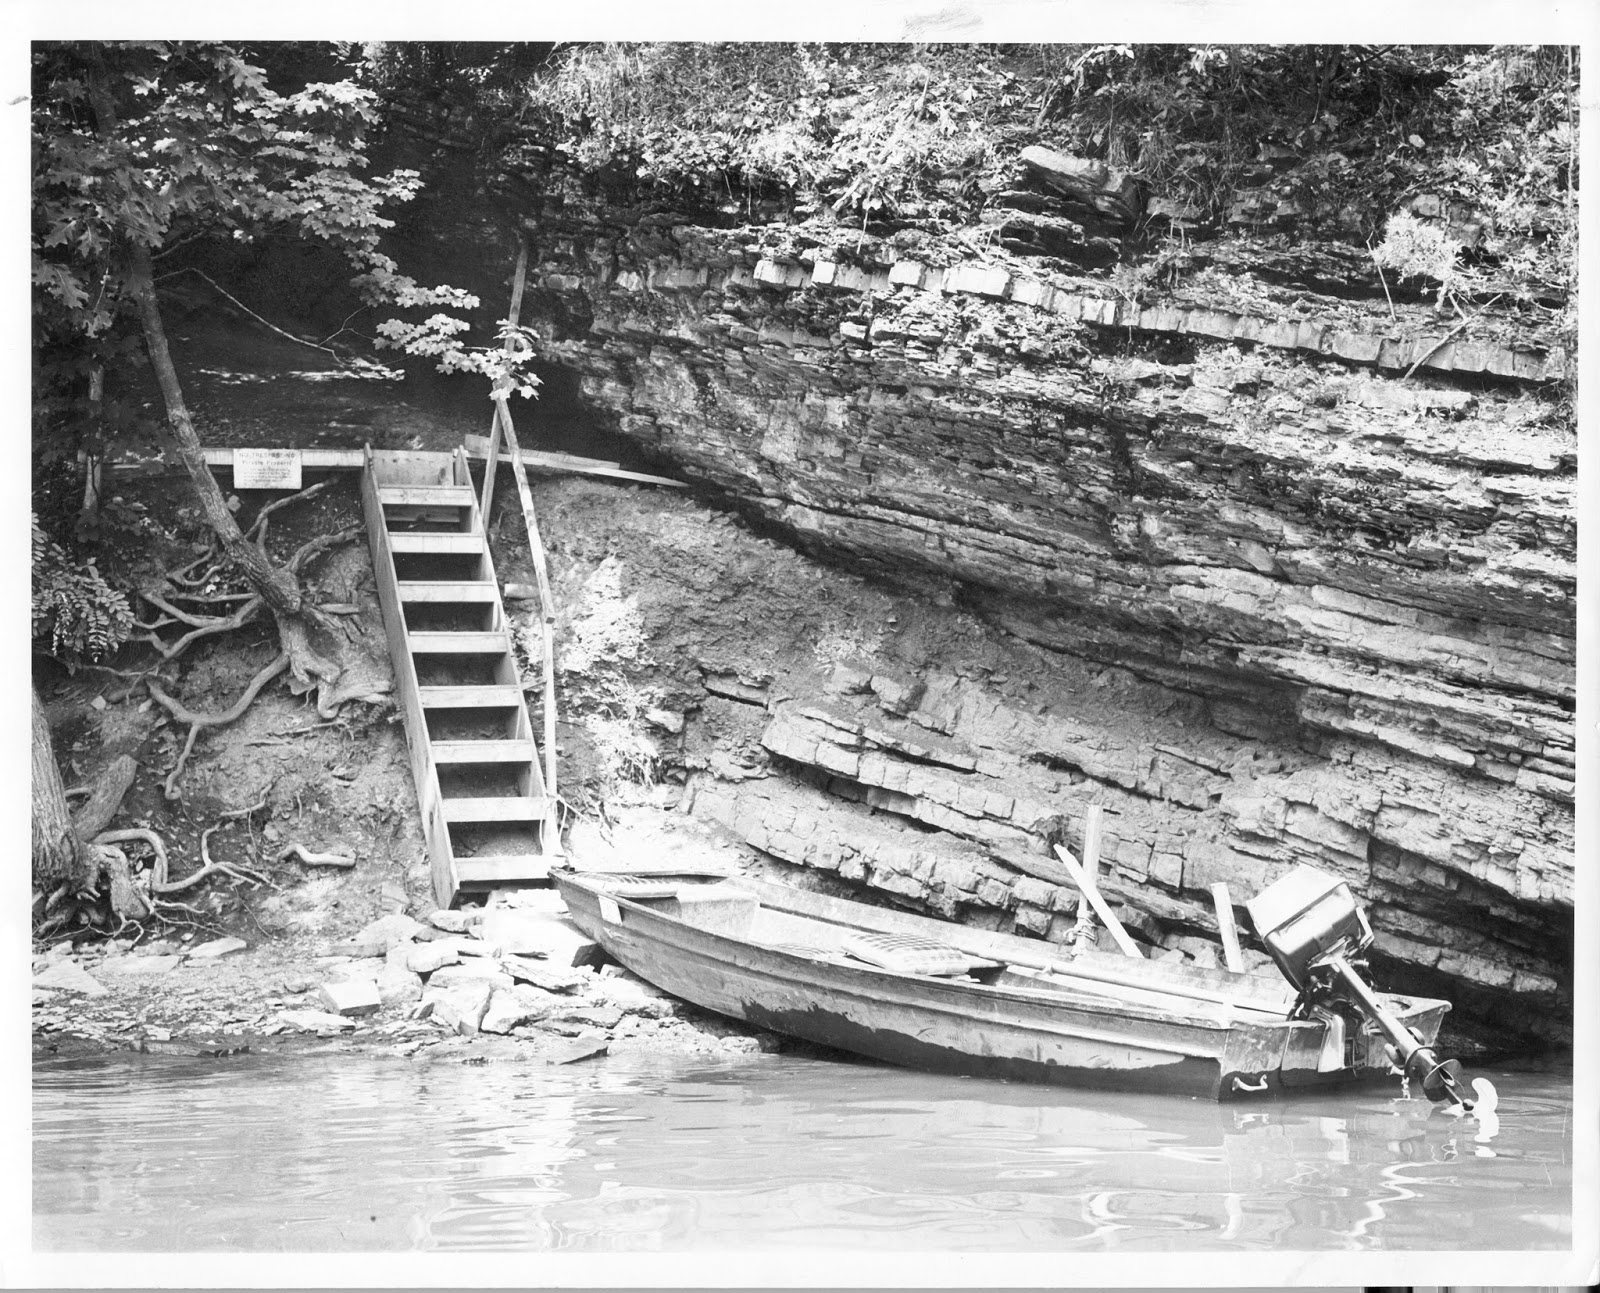 Small motorboat at edge of rocky area that has a ladder leading to higher ground.